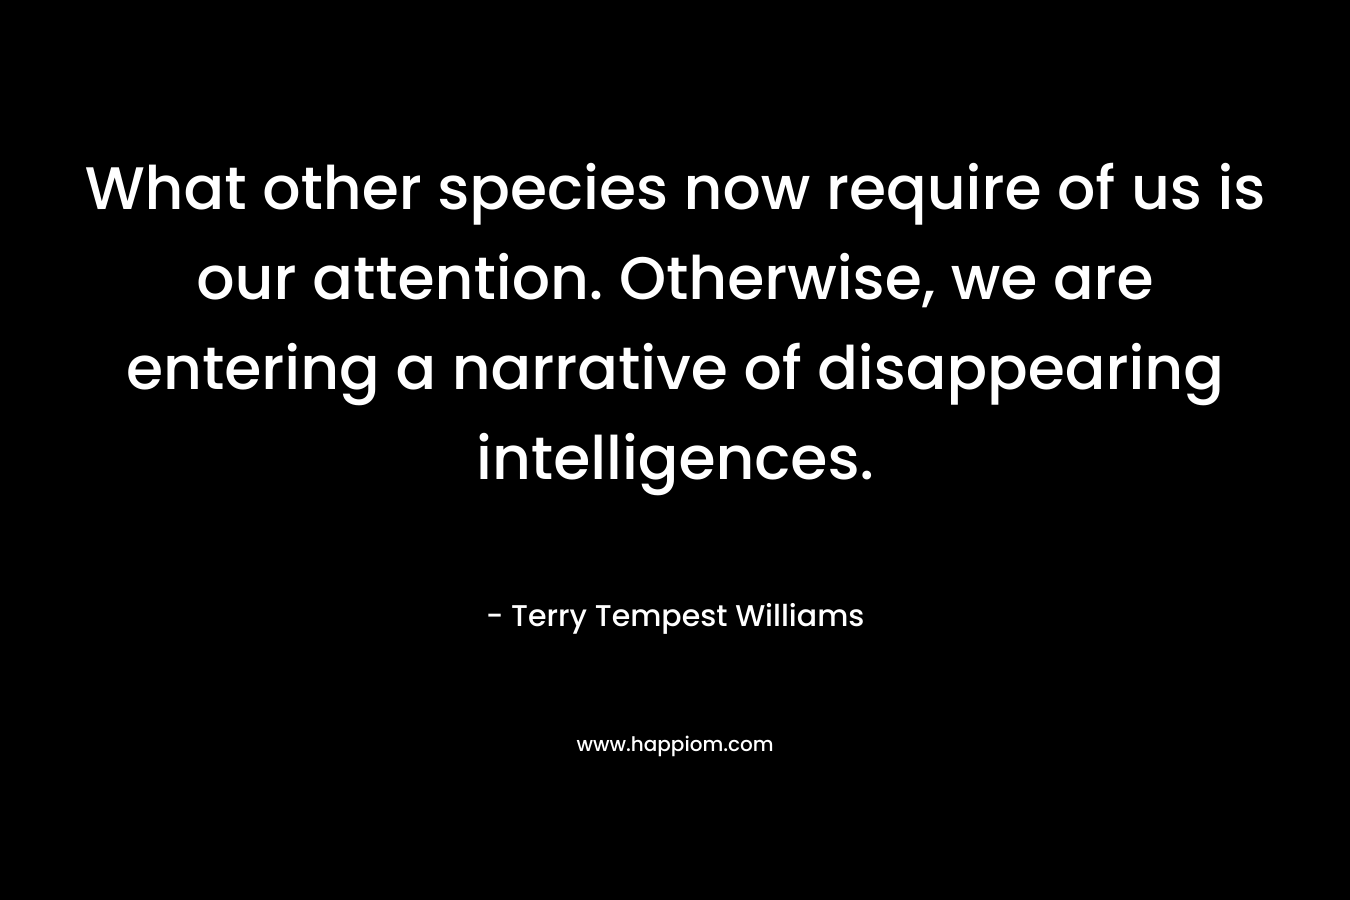 What other species now require of us is our attention. Otherwise, we are entering a narrative of disappearing intelligences. – Terry Tempest Williams